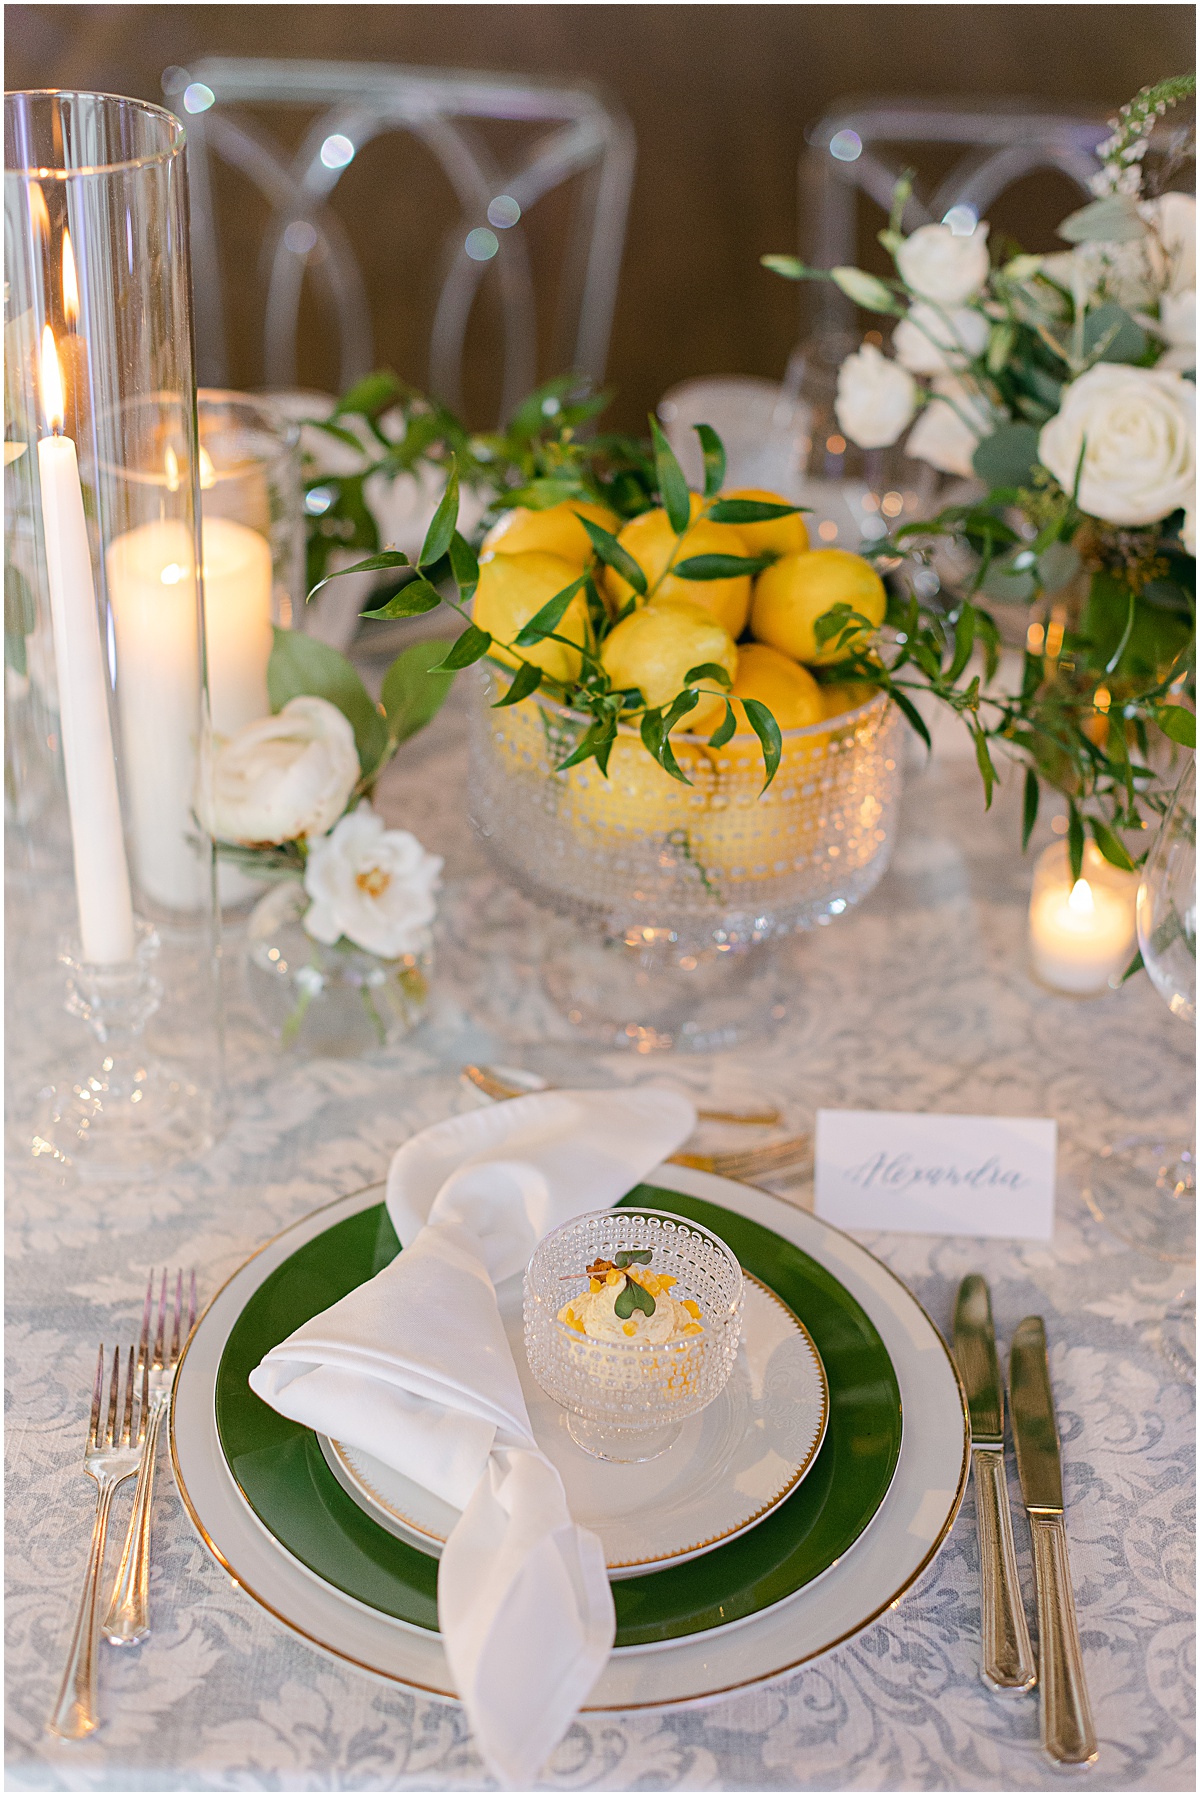 Reception place setting at lemon-themed wedding at Congressional Country Club by Sarah Bradshaw